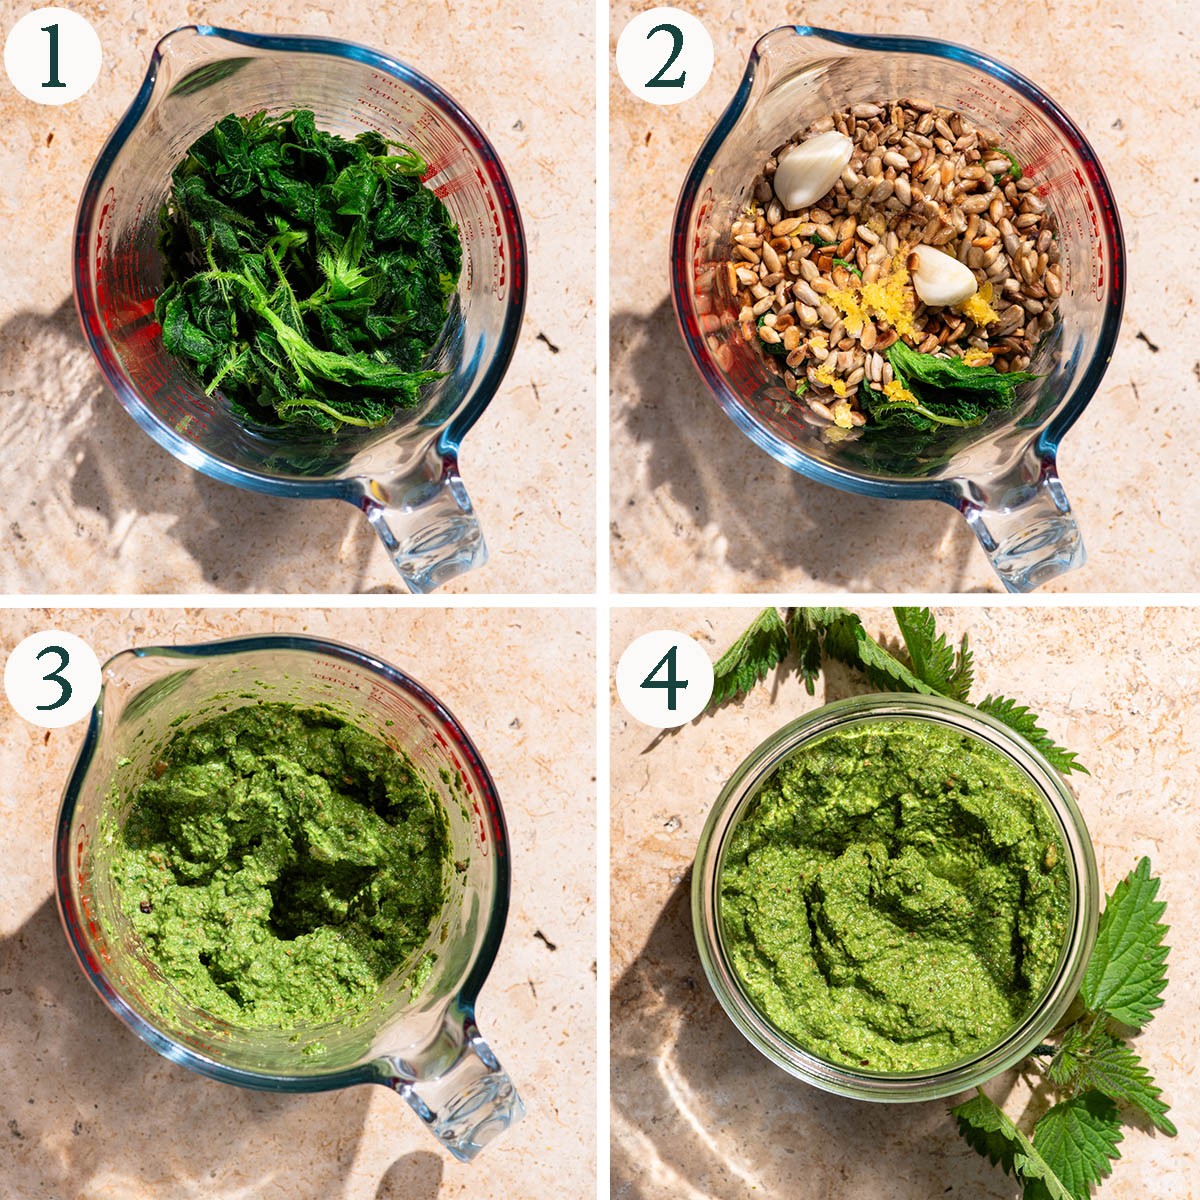 Pesto steps 1 to 4, blanched nettles and before and after mixing.